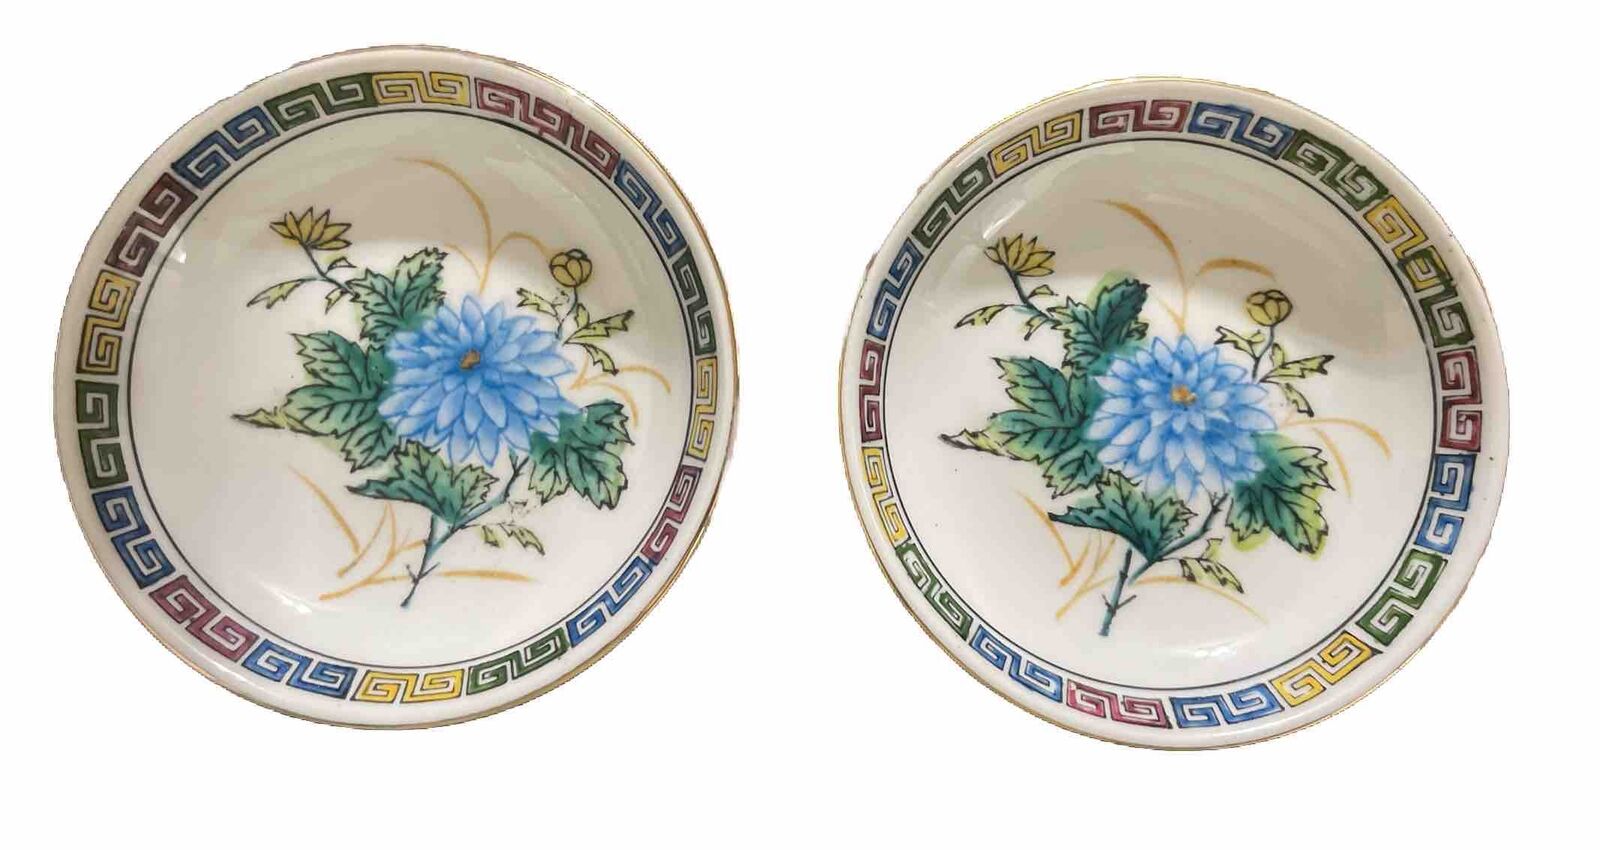 Vintage Famille Peony Trinket Dishes | Chinoiserie | Excellent Condition *H